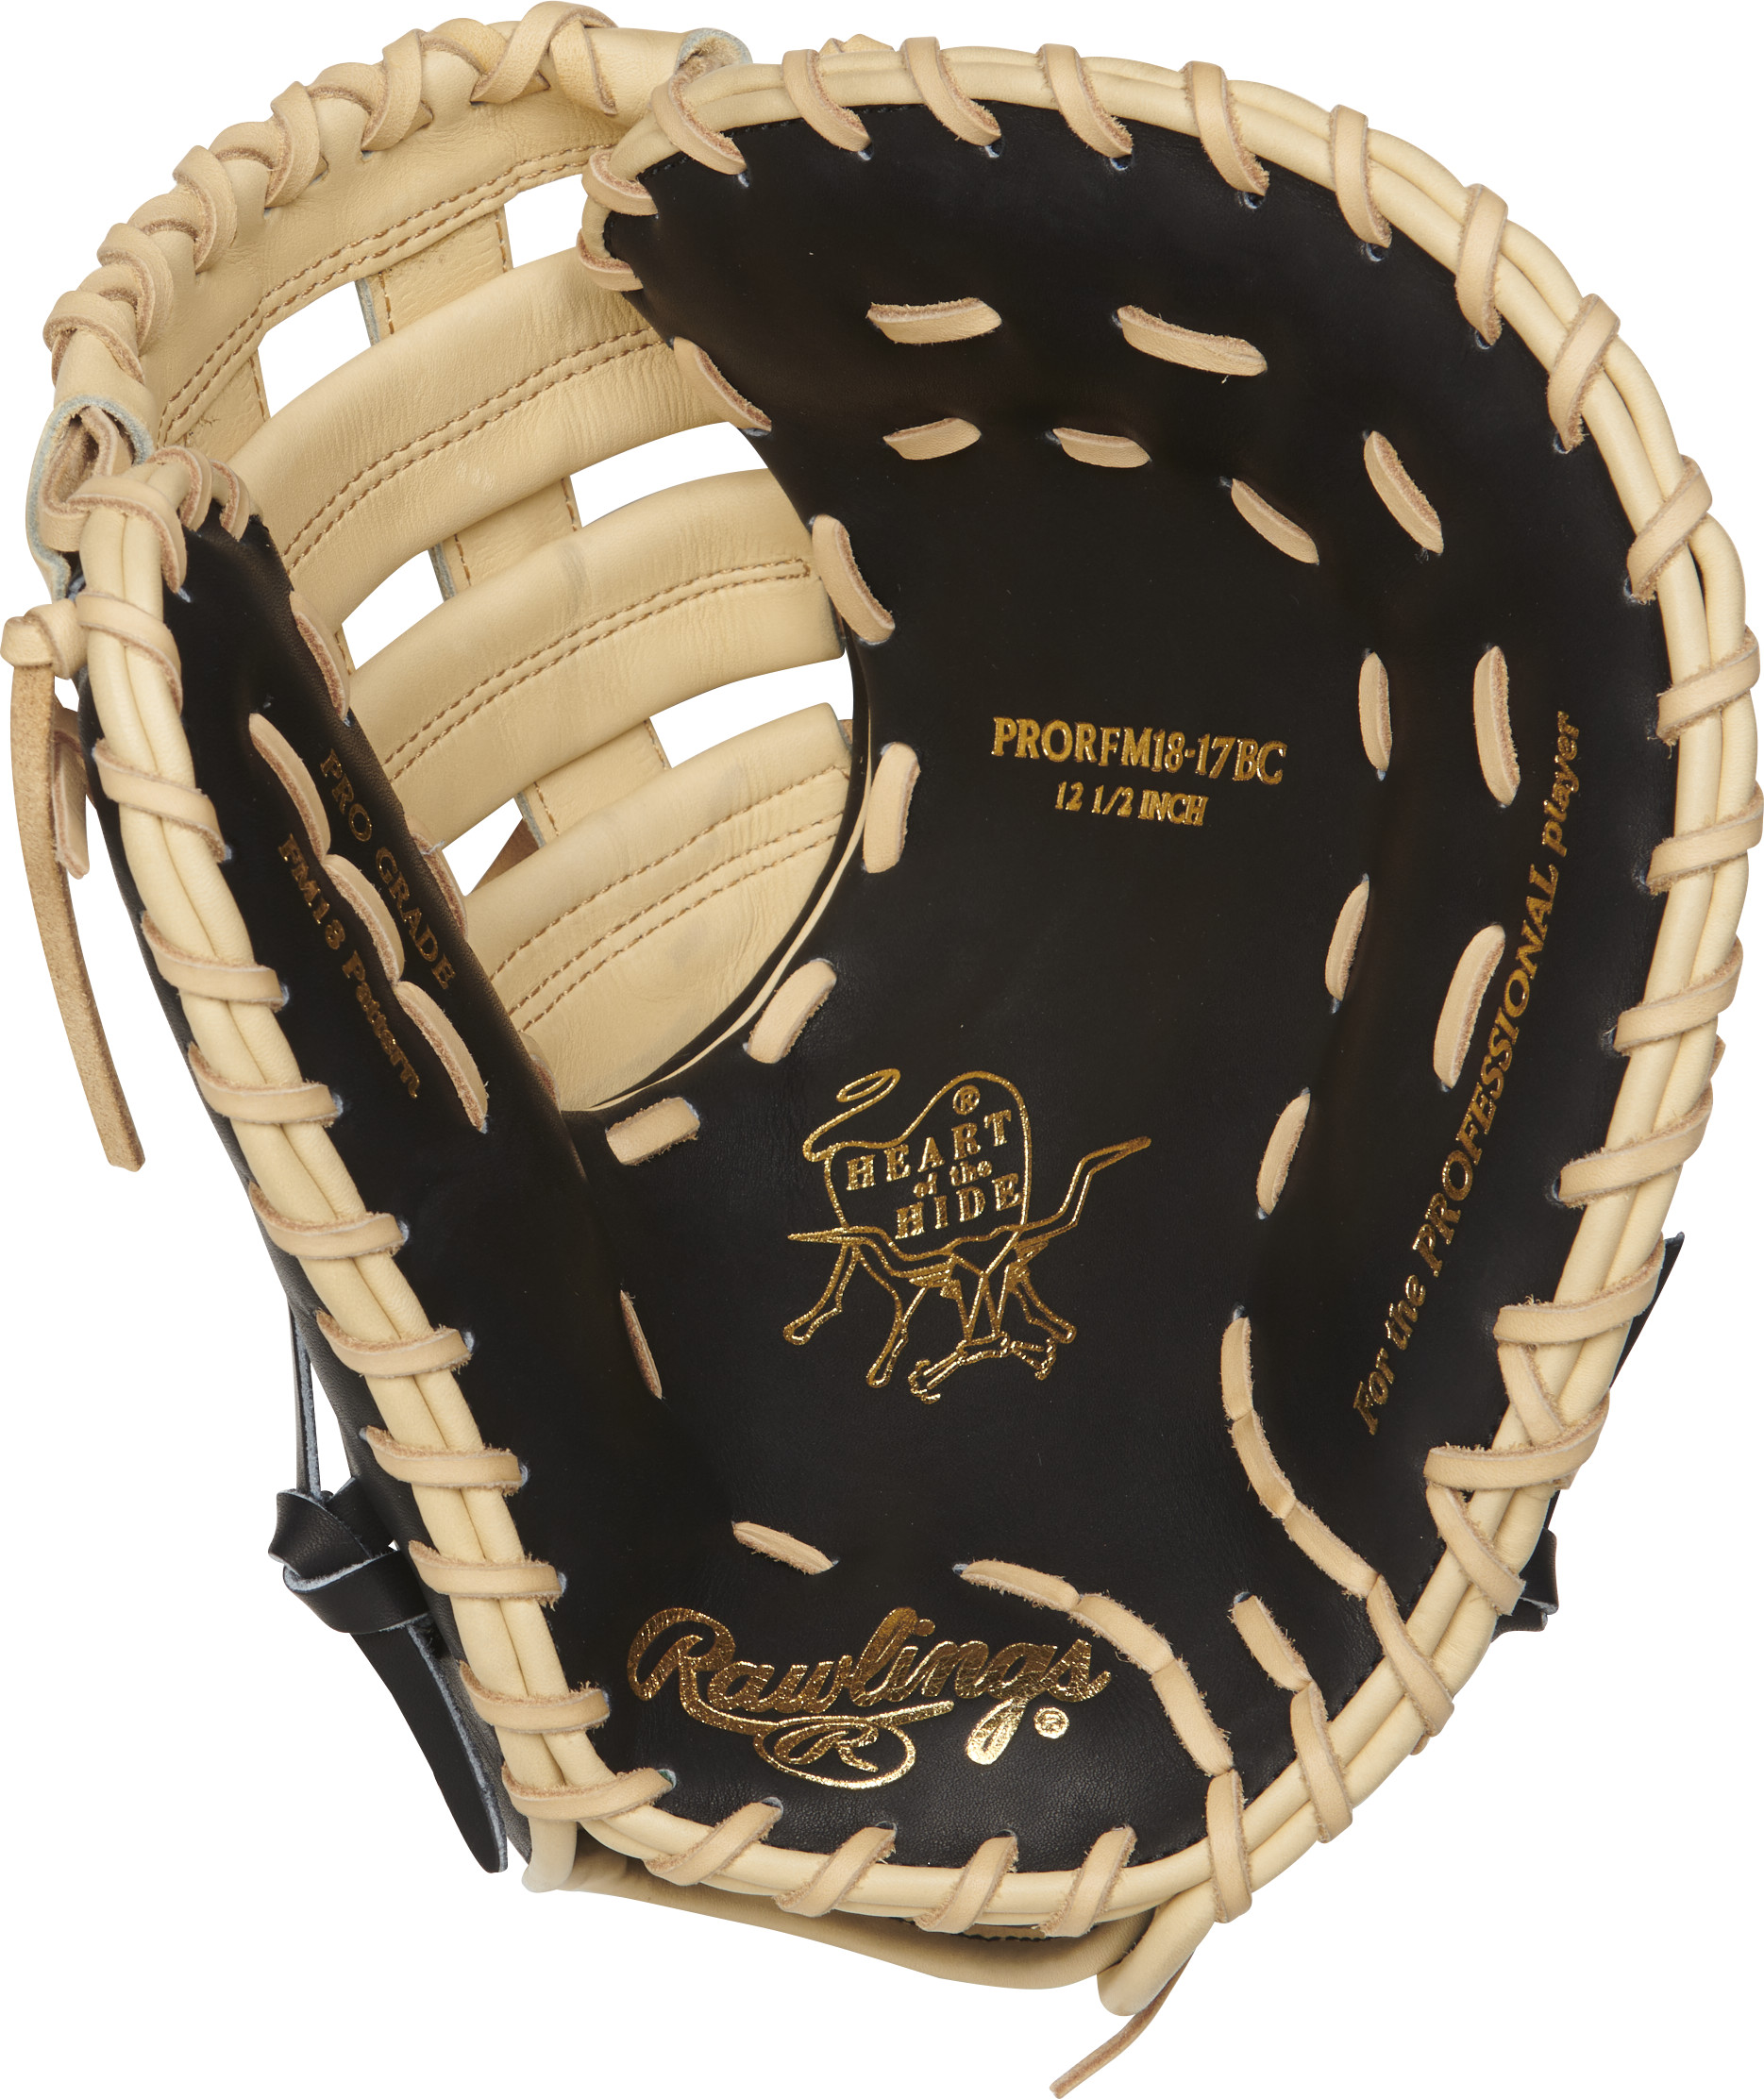 Heart of the Hide R2G 12.5 in Glove PRORFM18-17BC